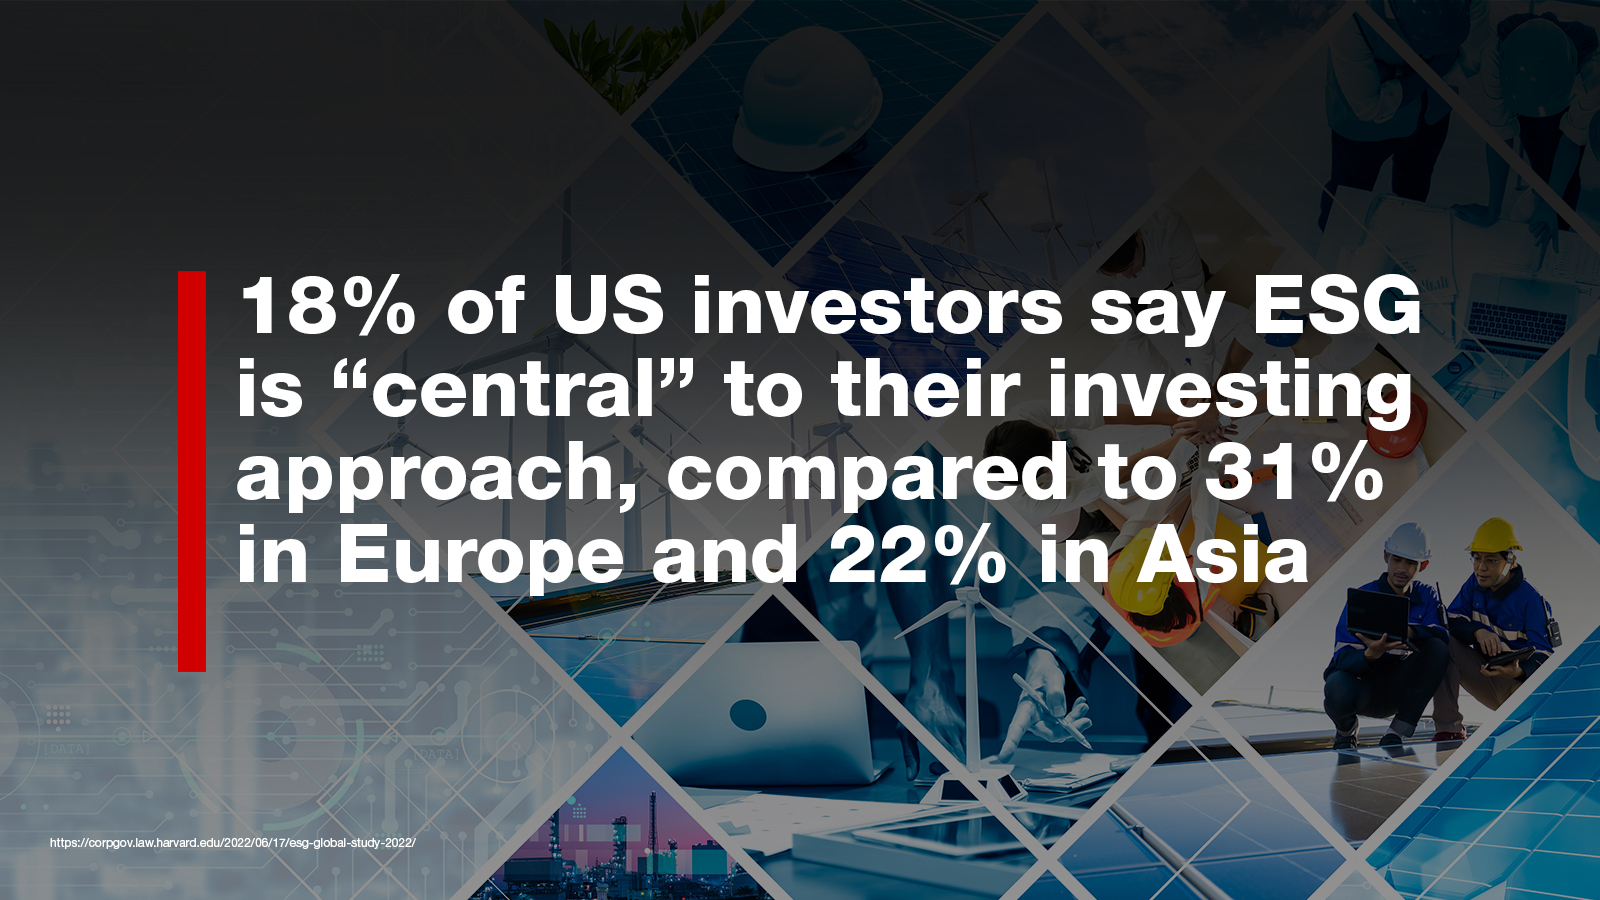 18% of US investors say ESG is central to their approach